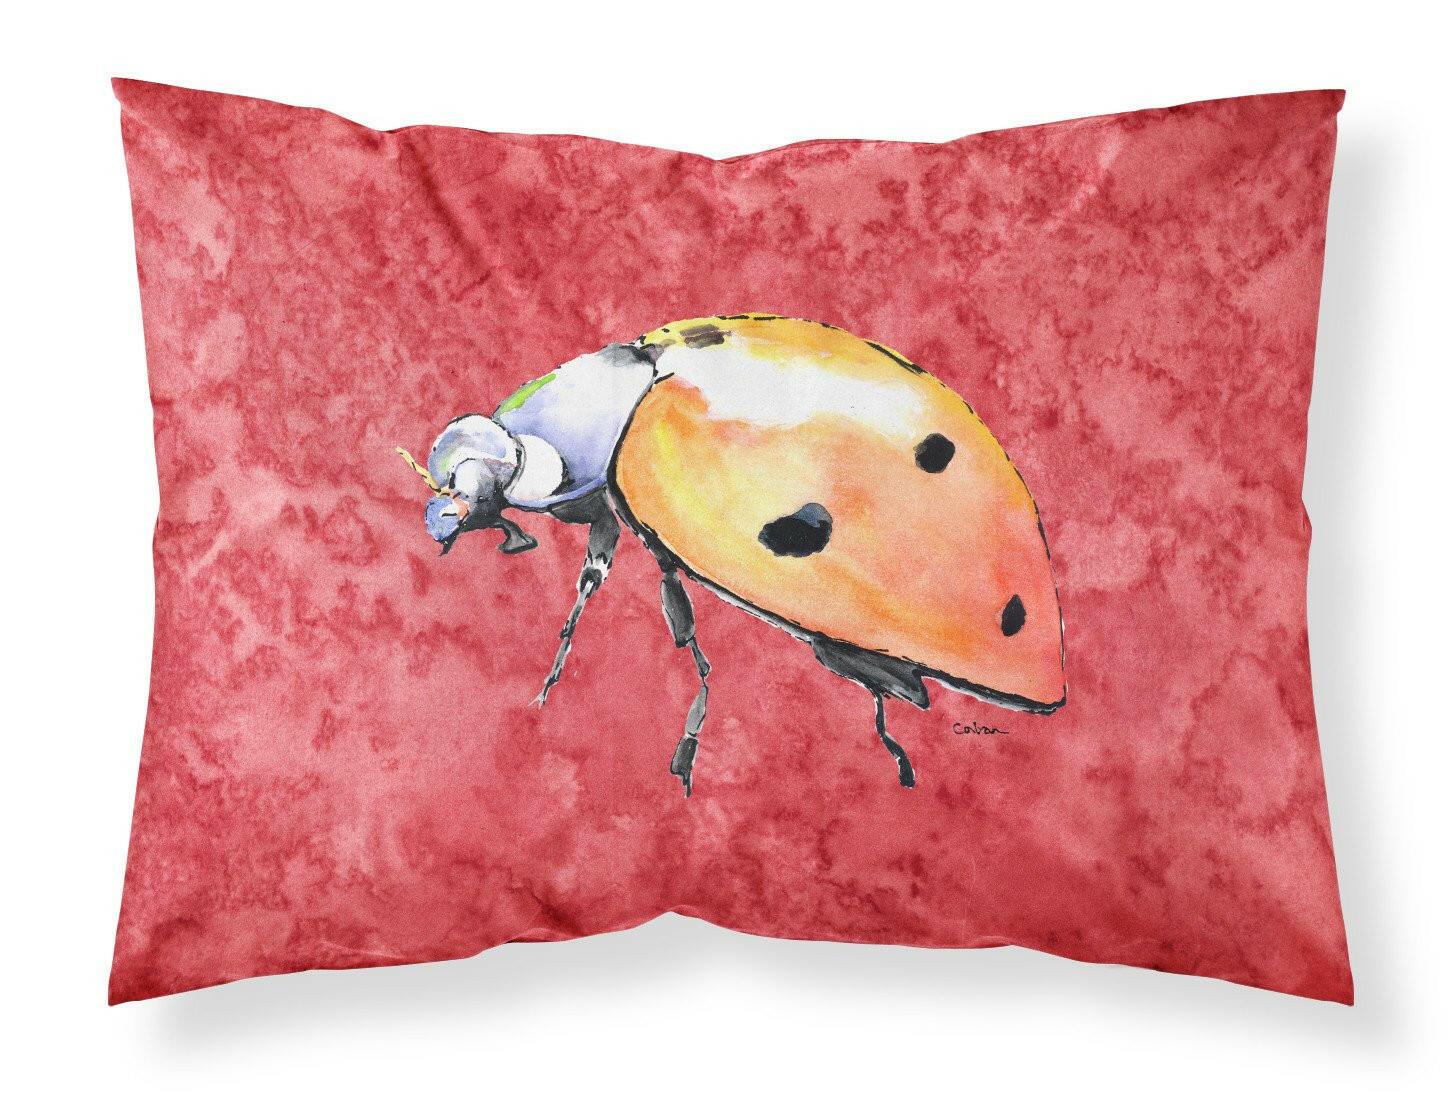 Lady Bug on Red Moisture wicking Fabric standard pillowcase by Caroline's Treasures